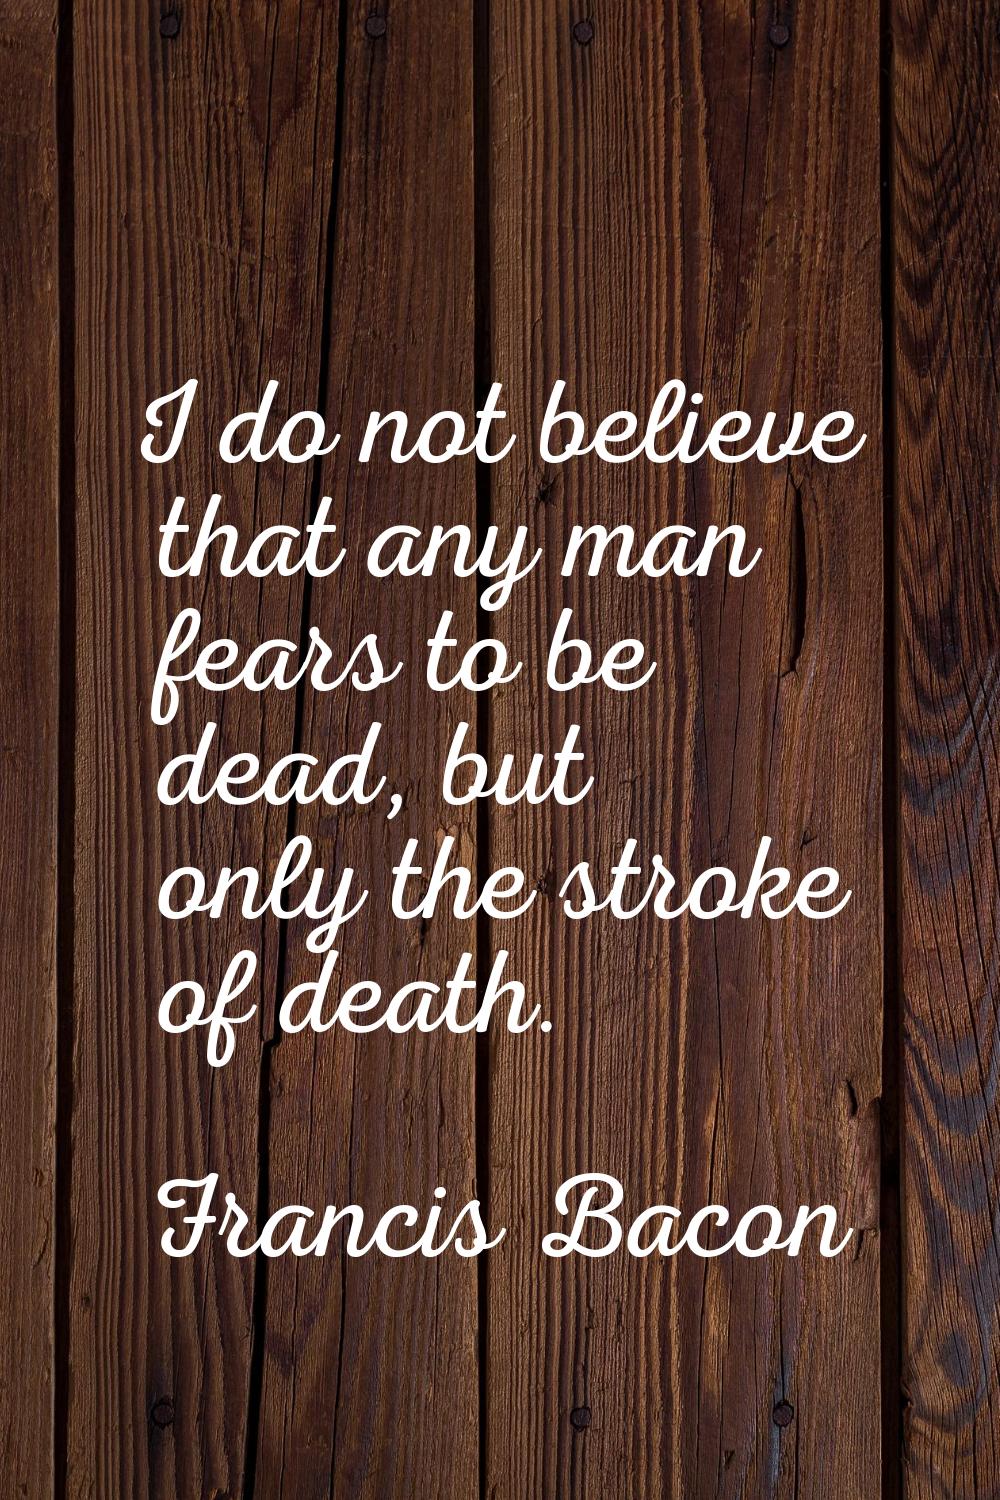 I do not believe that any man fears to be dead, but only the stroke of death.